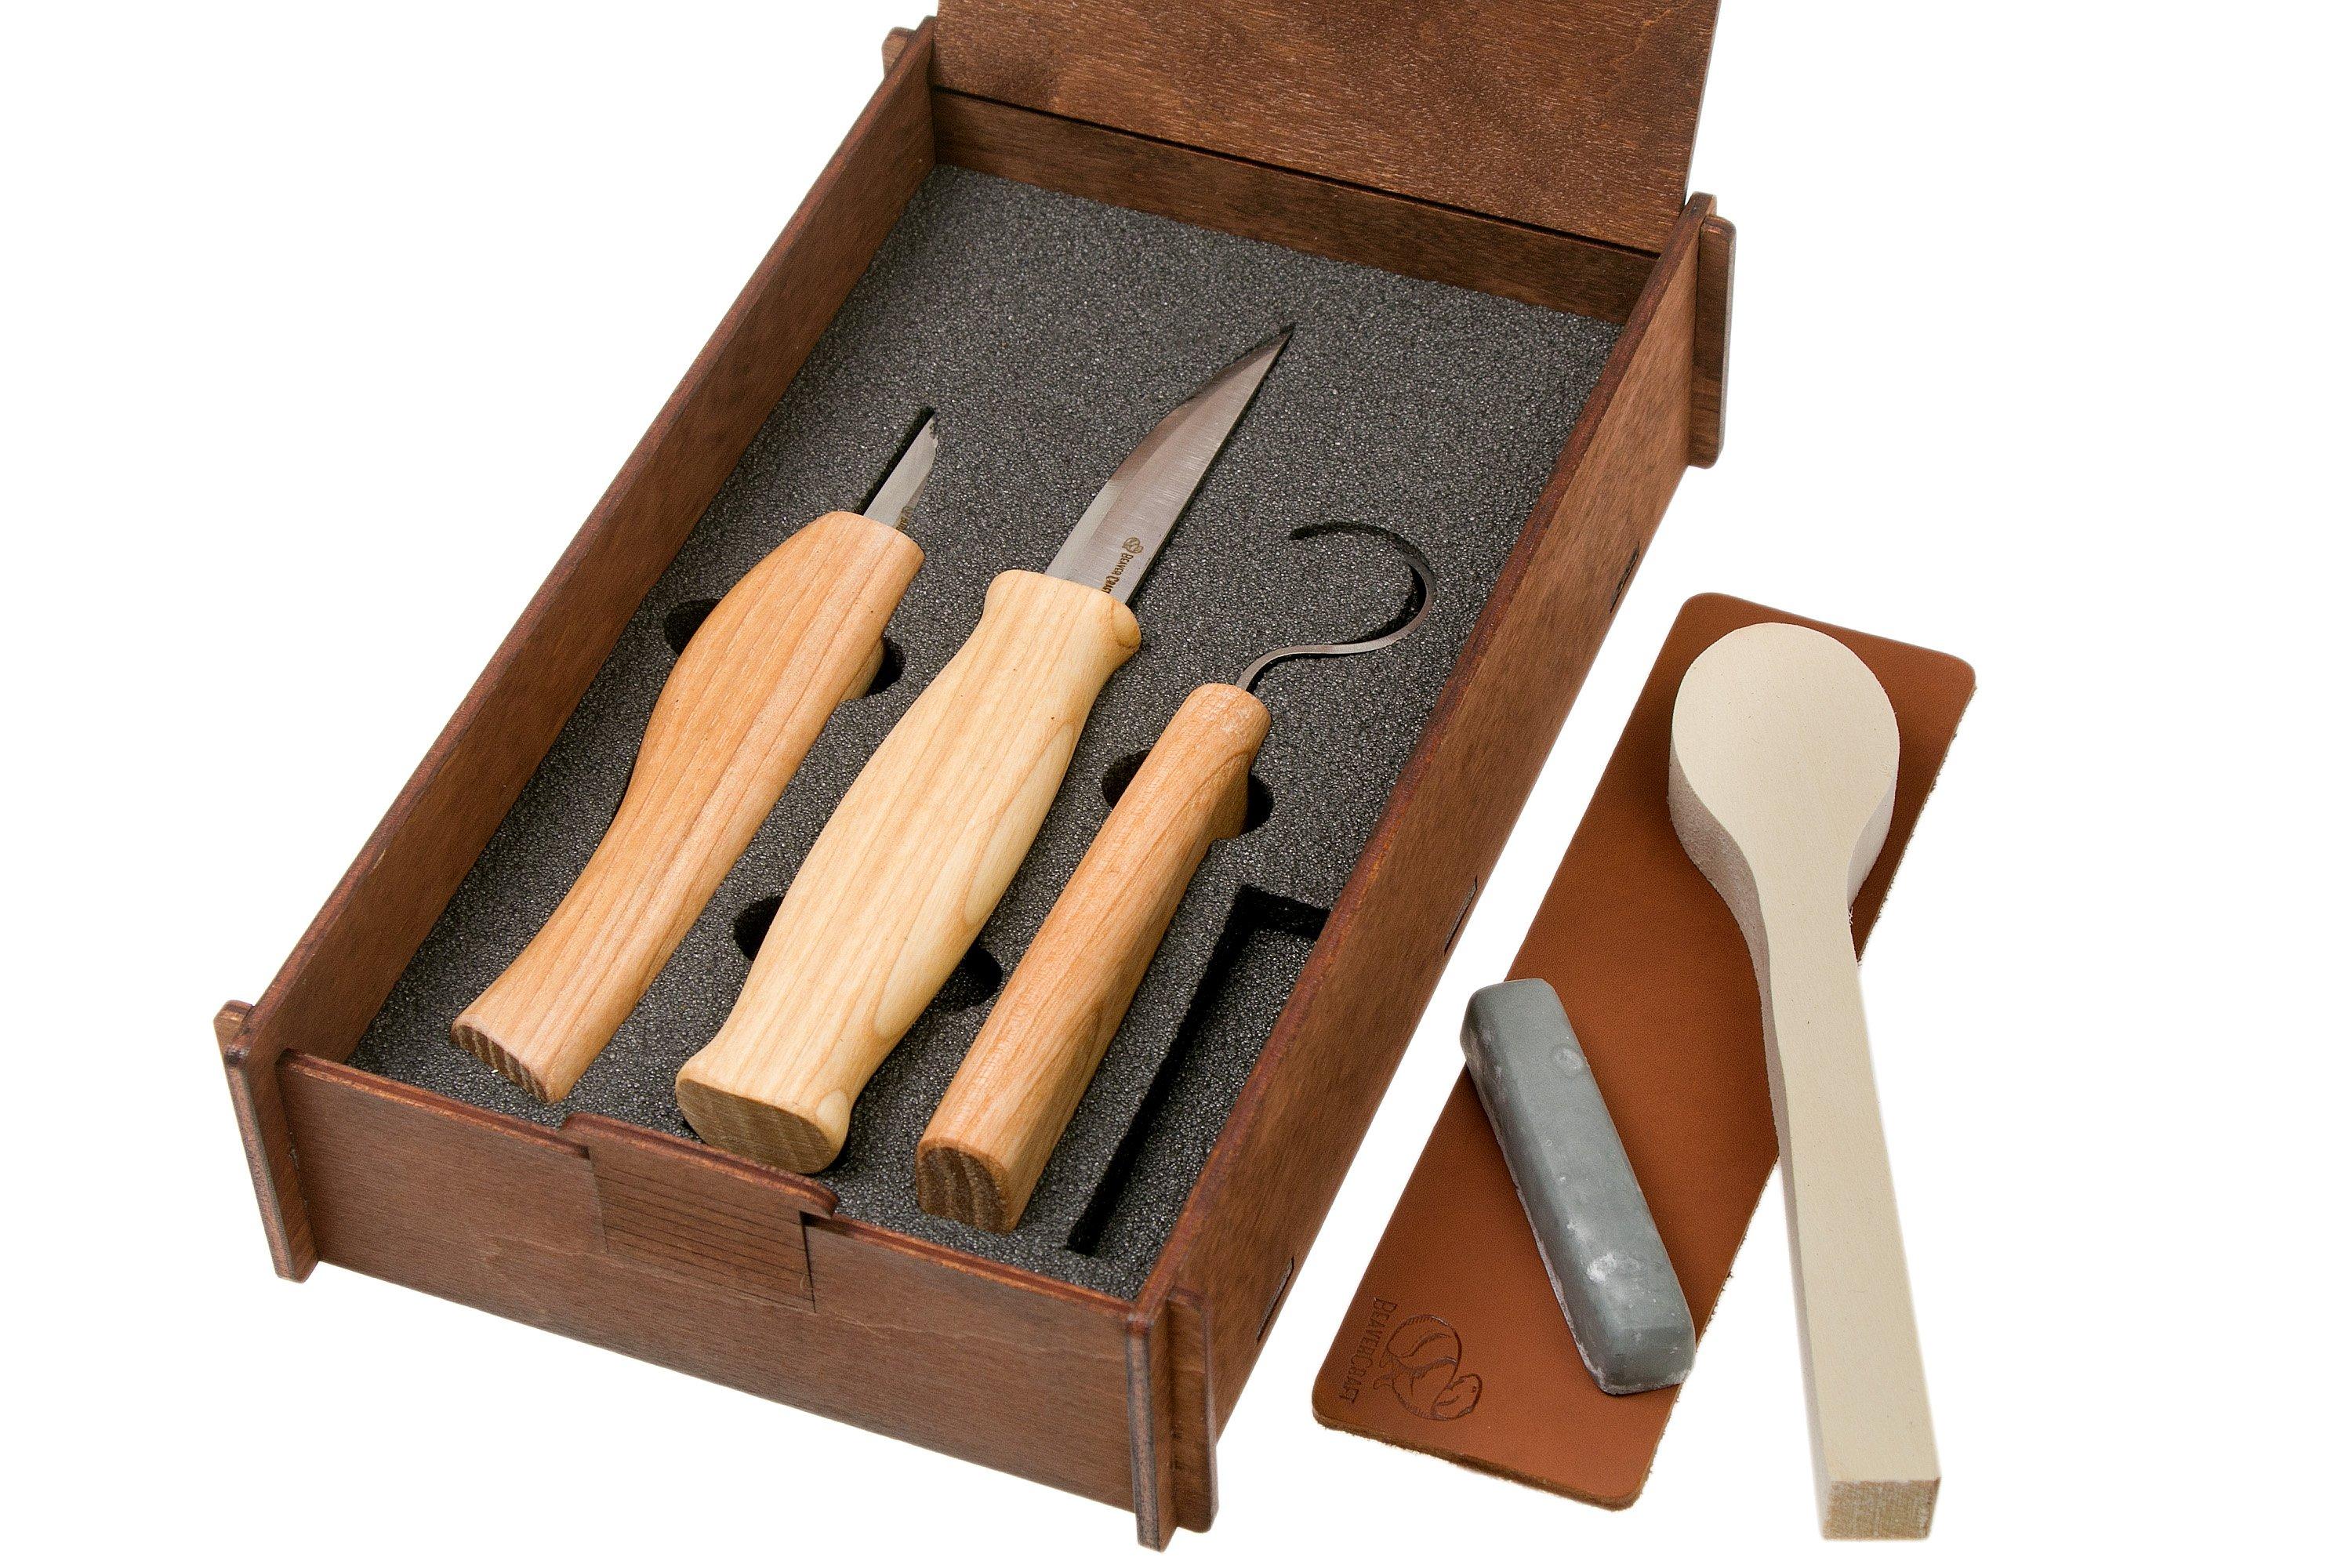 BeaverCraft S18X Deluxe Wood Carving Kit S14x Wood Spoon Carving Tools Kit